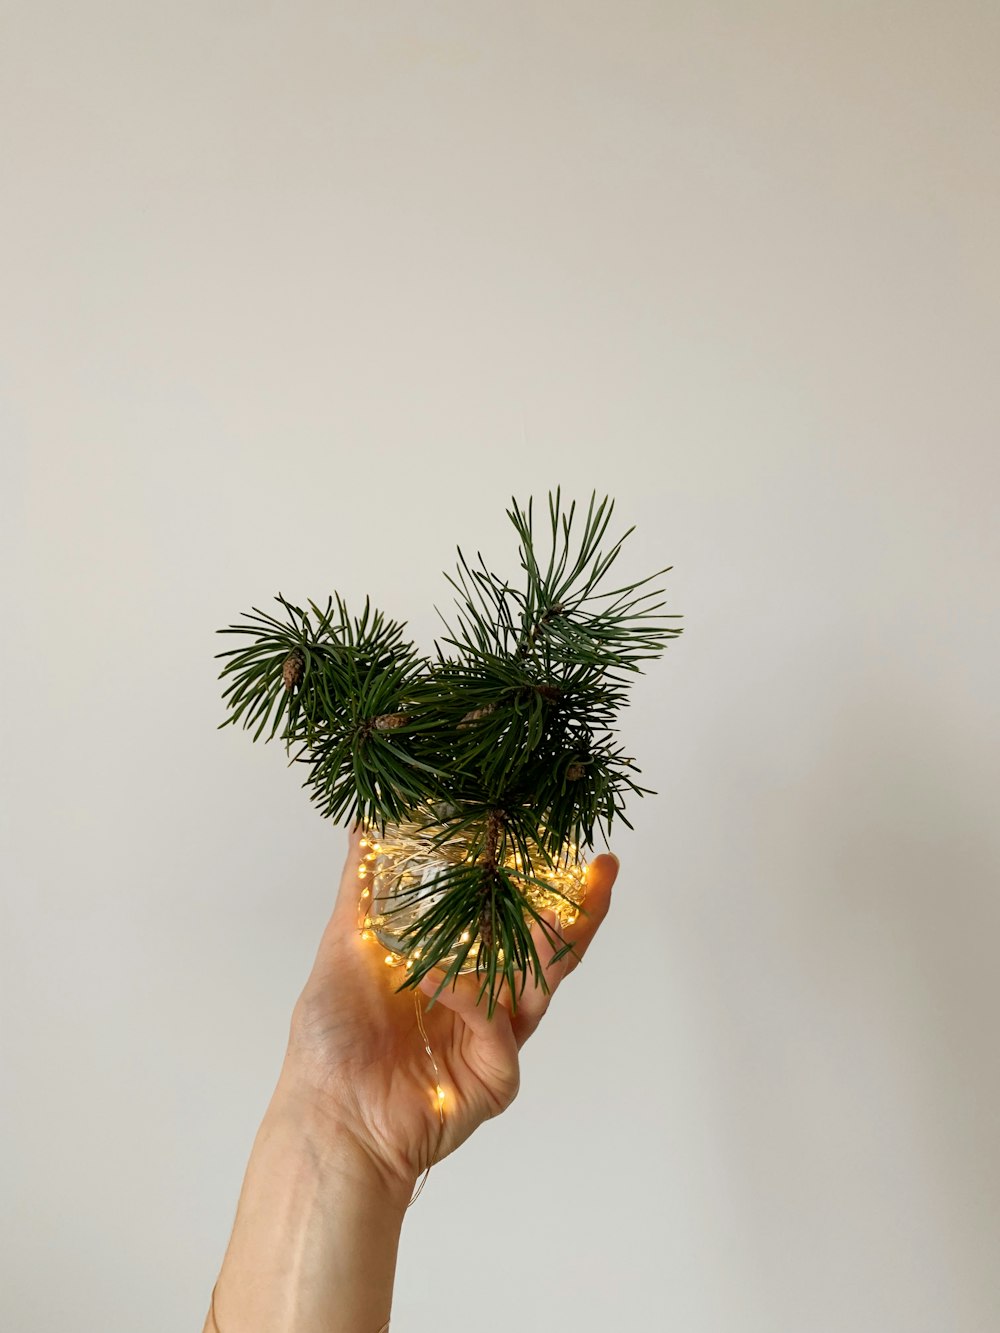 a hand holding a small pine tree with lights